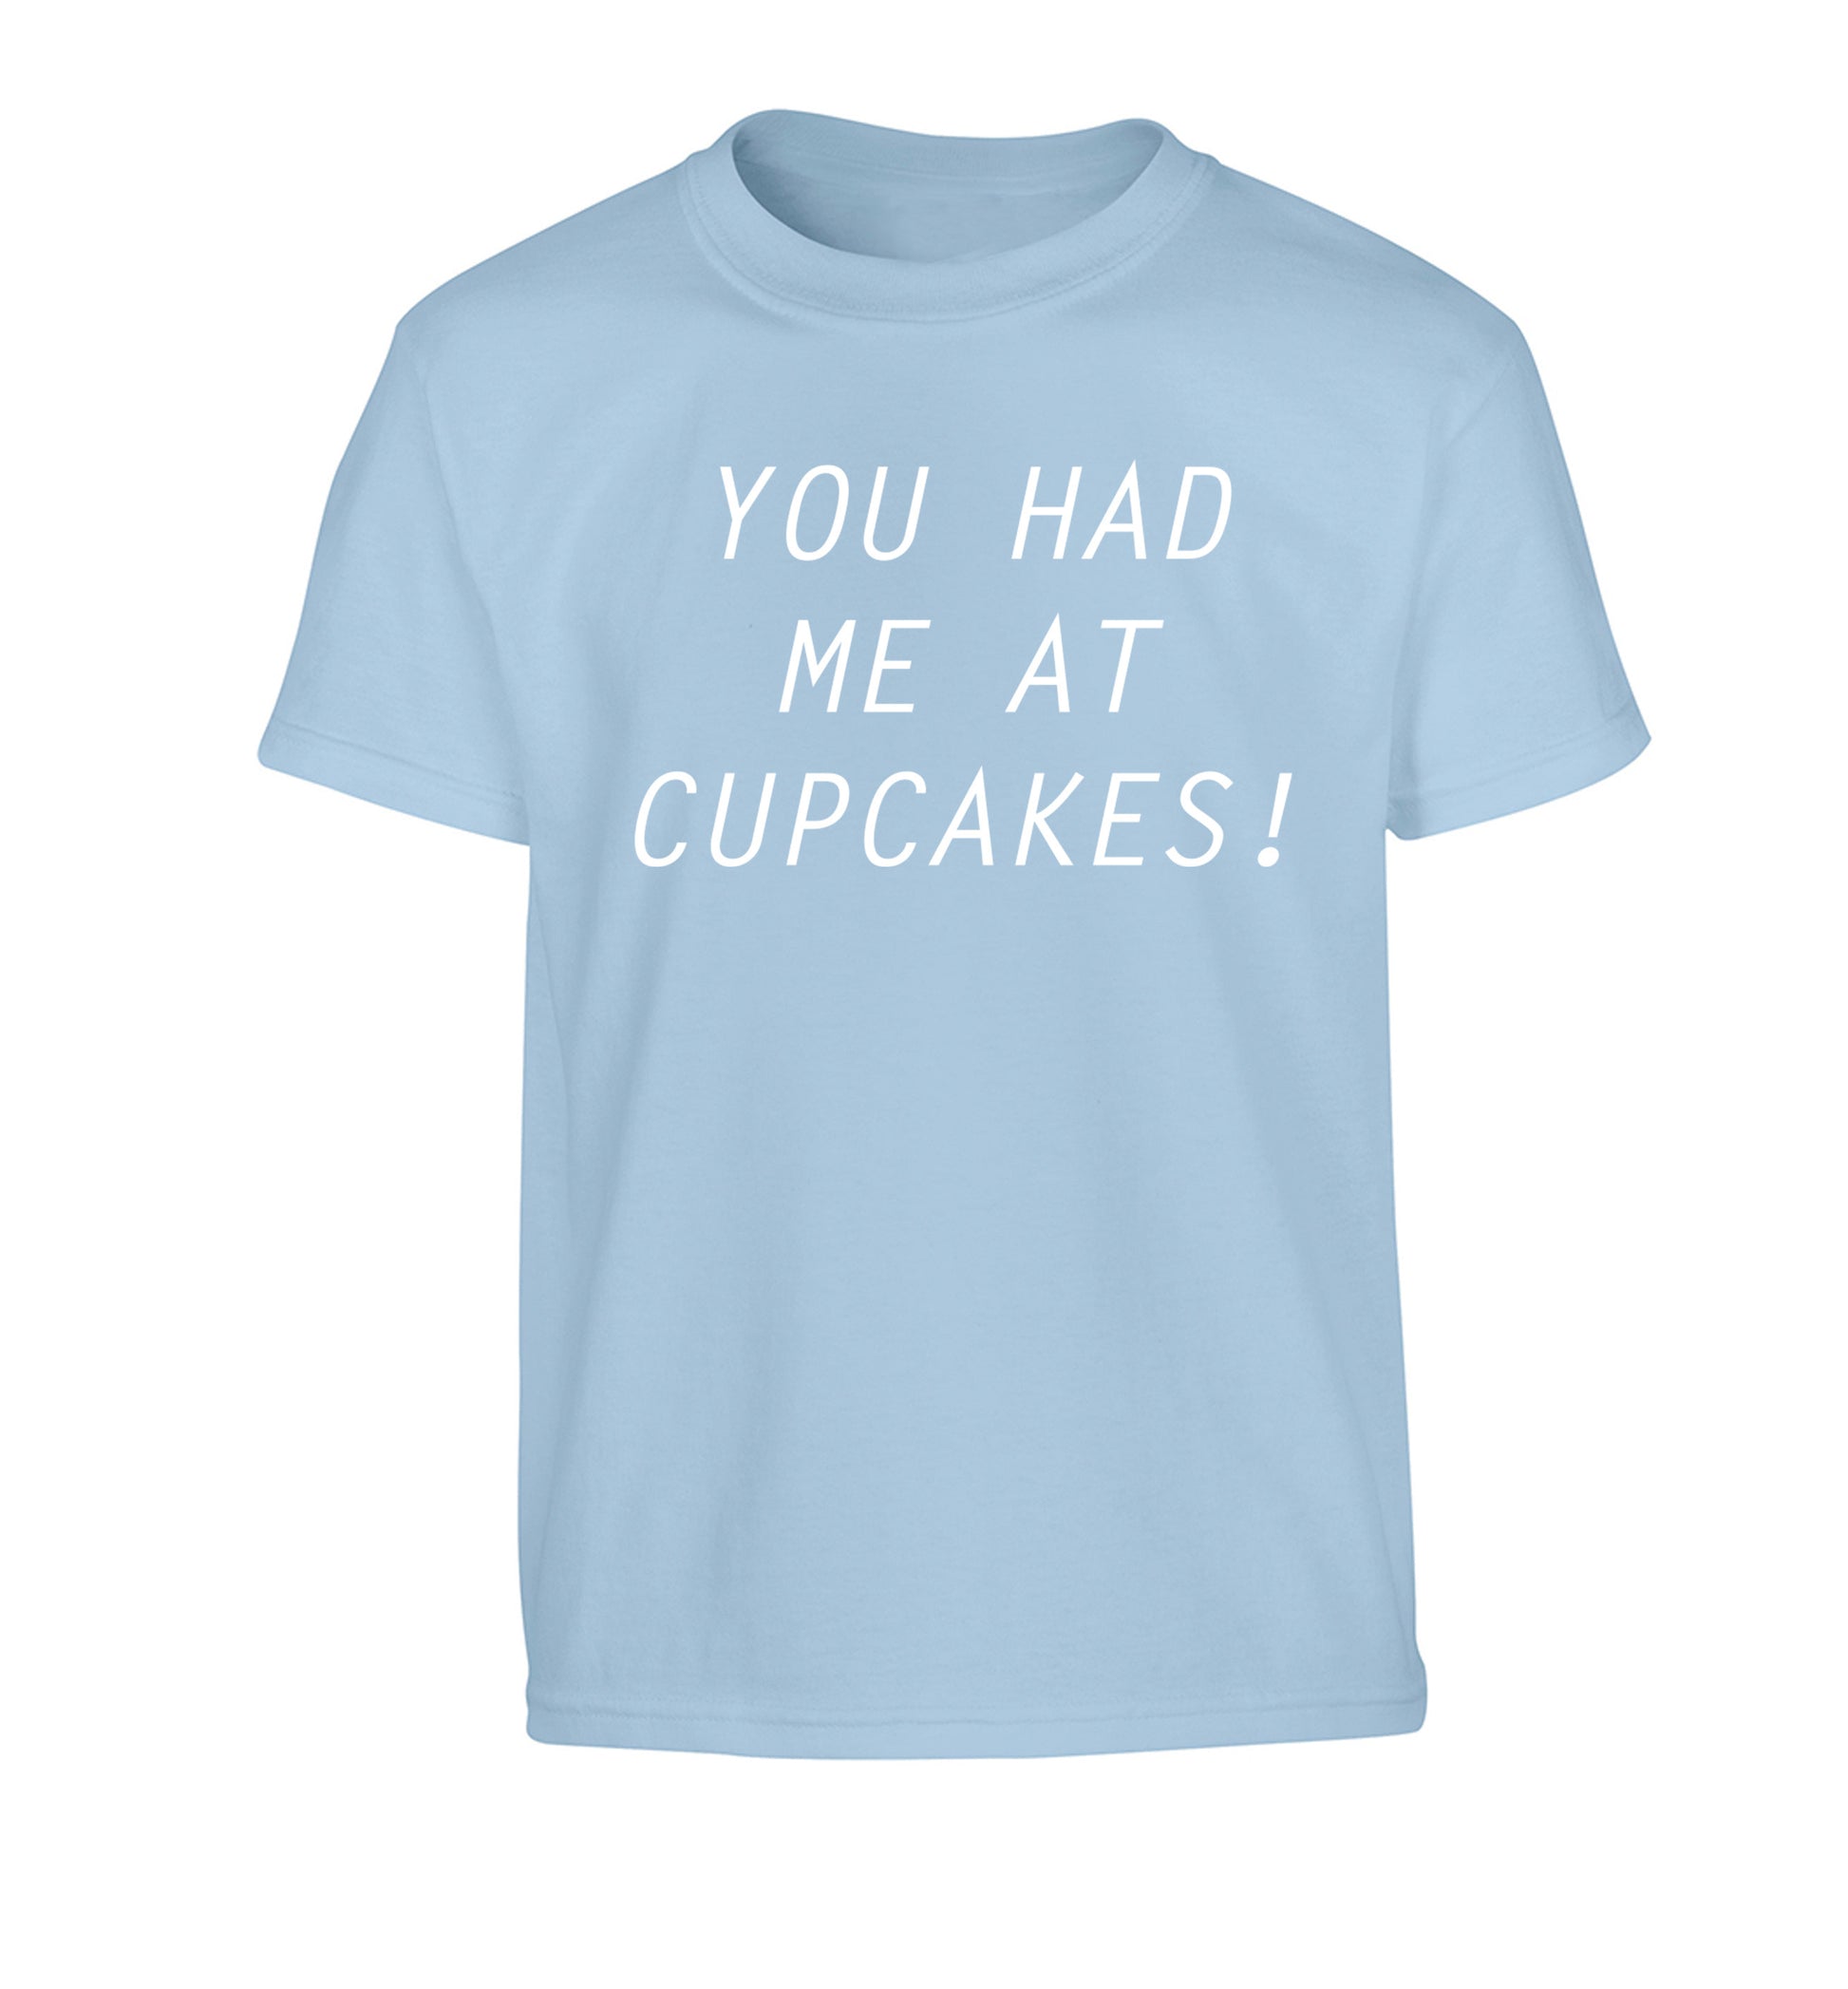 You had me at cupcakes Children's light blue Tshirt 12-14 Years